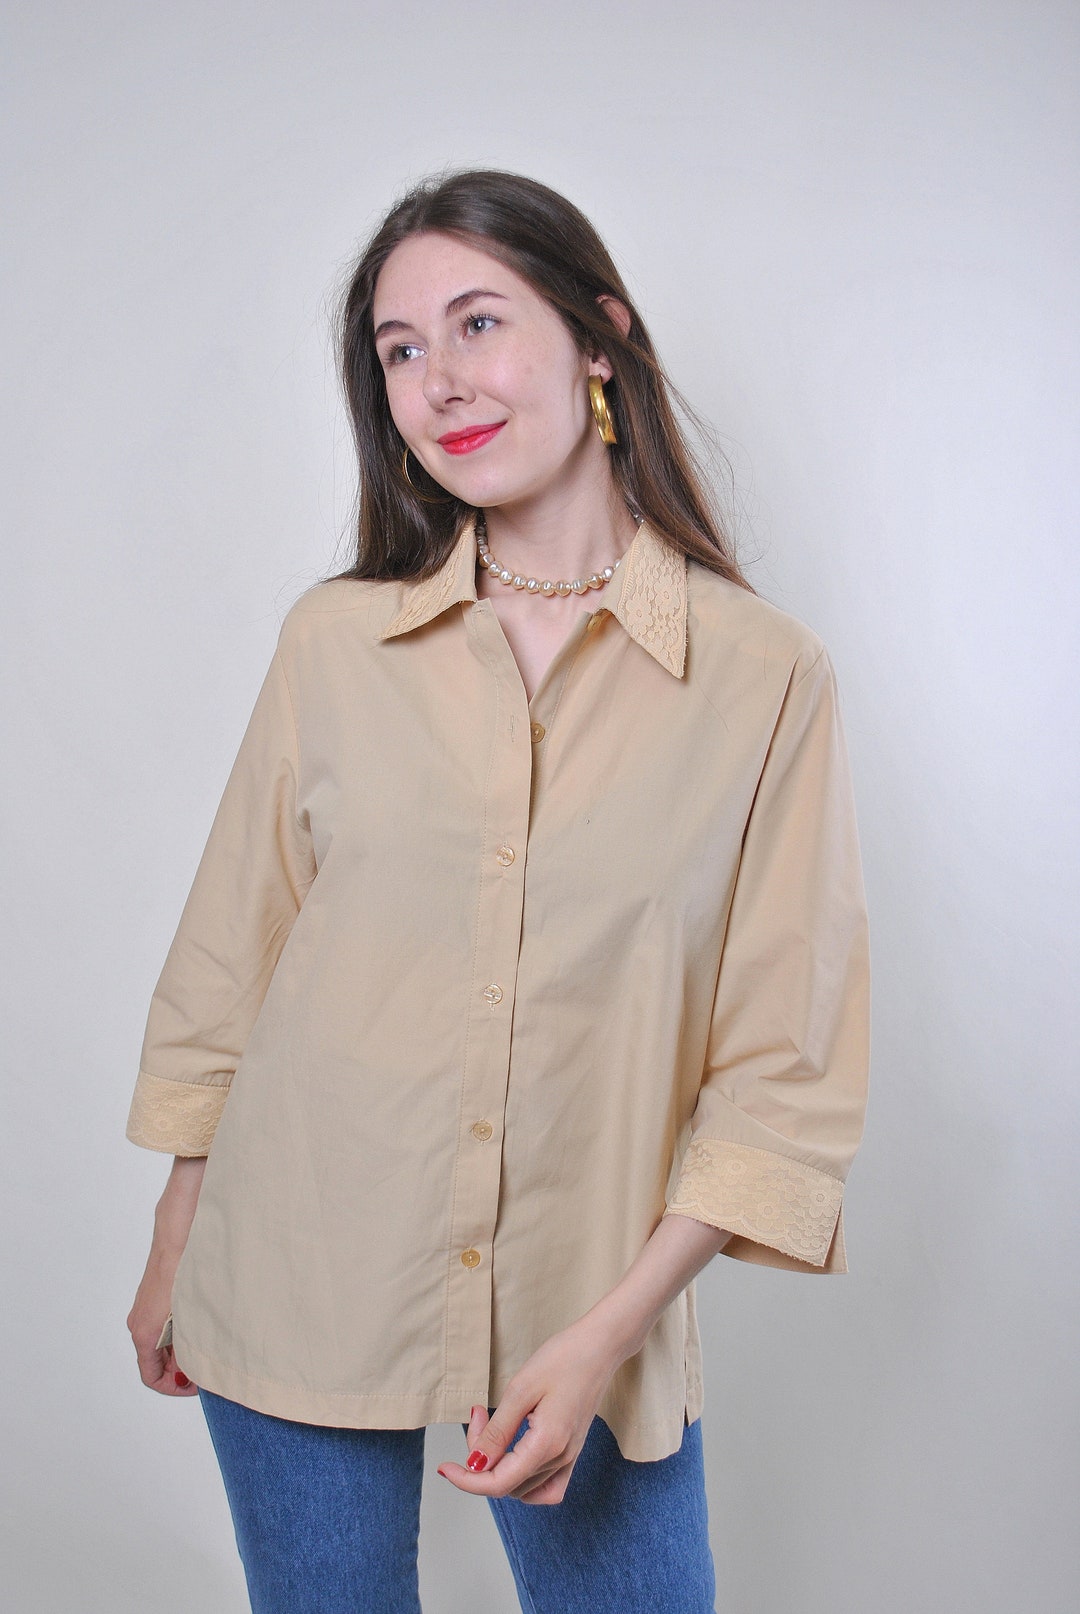 Vintage Beige Quarter Sleeve Blouse With Lace Collar, Size L - Etsy